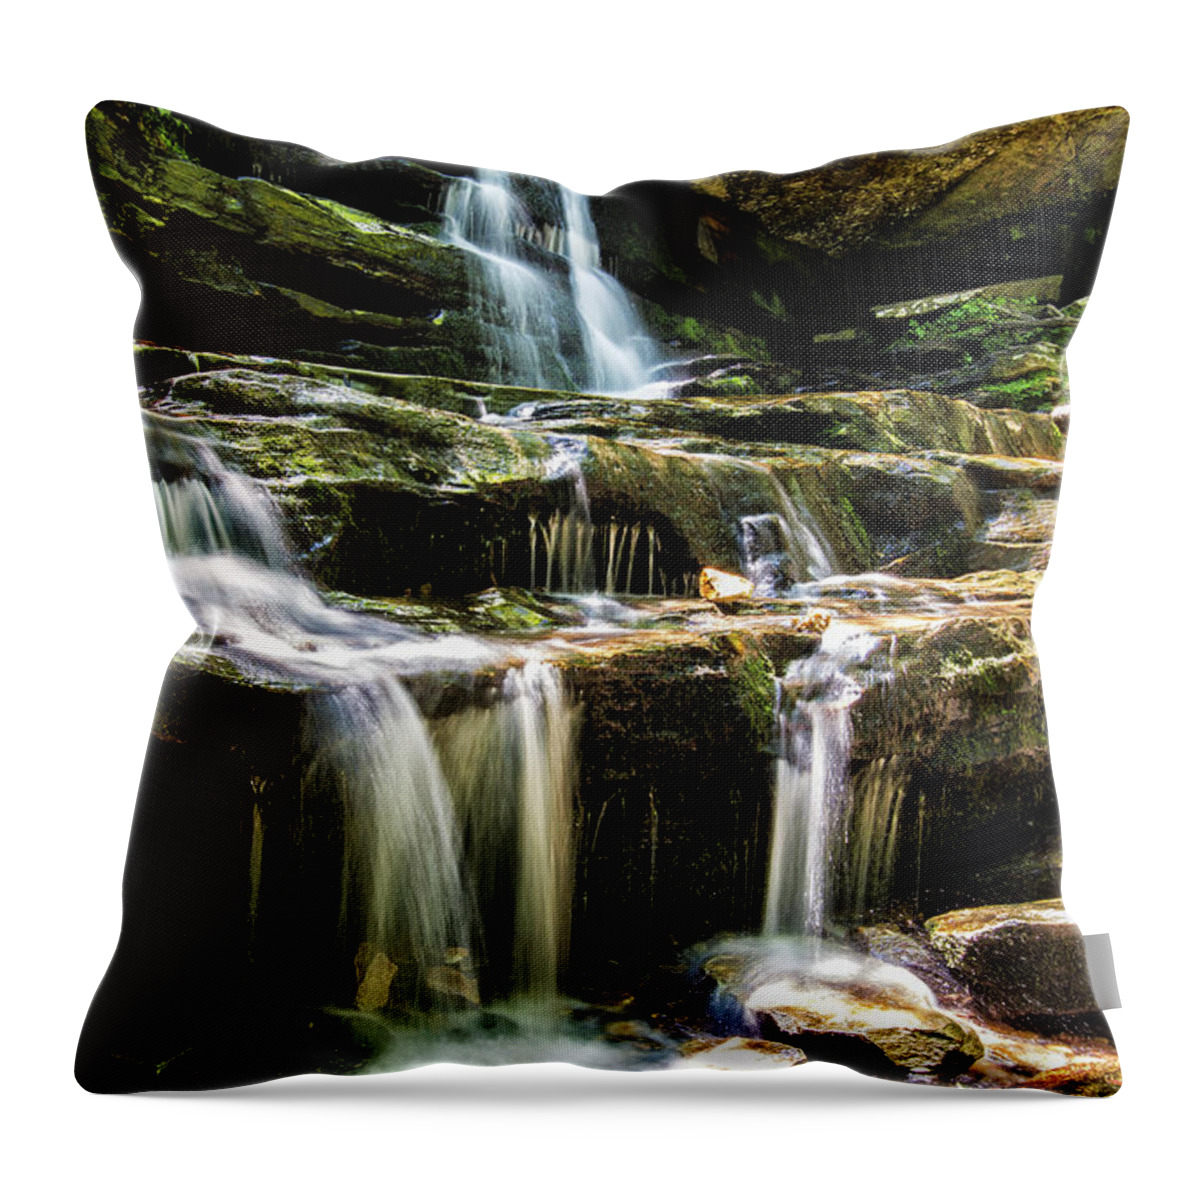 In This Long Exposure Color Photography Window Falls Is Shown. This Lovely Throw Pillow featuring the photograph Window Falls Hanging Rock State Park Danbury North Carolina by Bob Decker